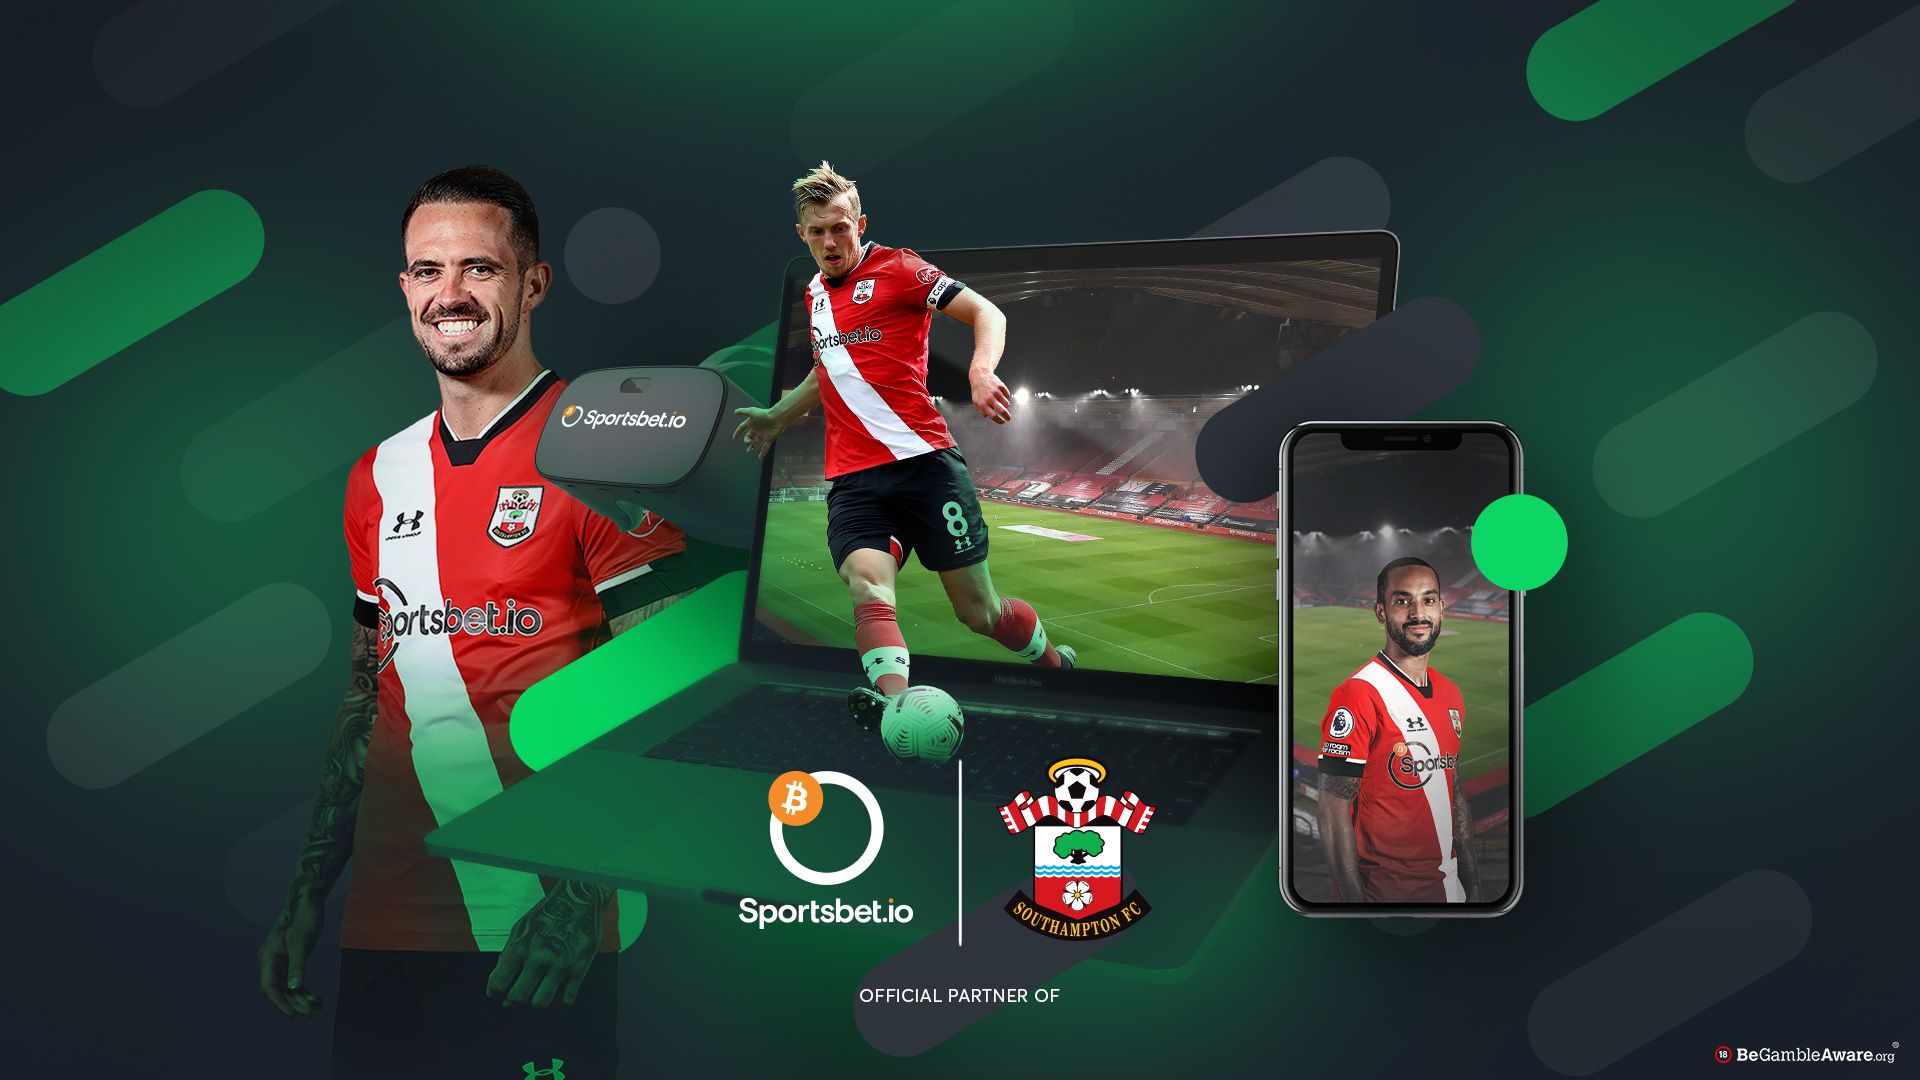 Sportsbet.io redefine matchday activations at-home, with new virtual VIP experiences for Southampton